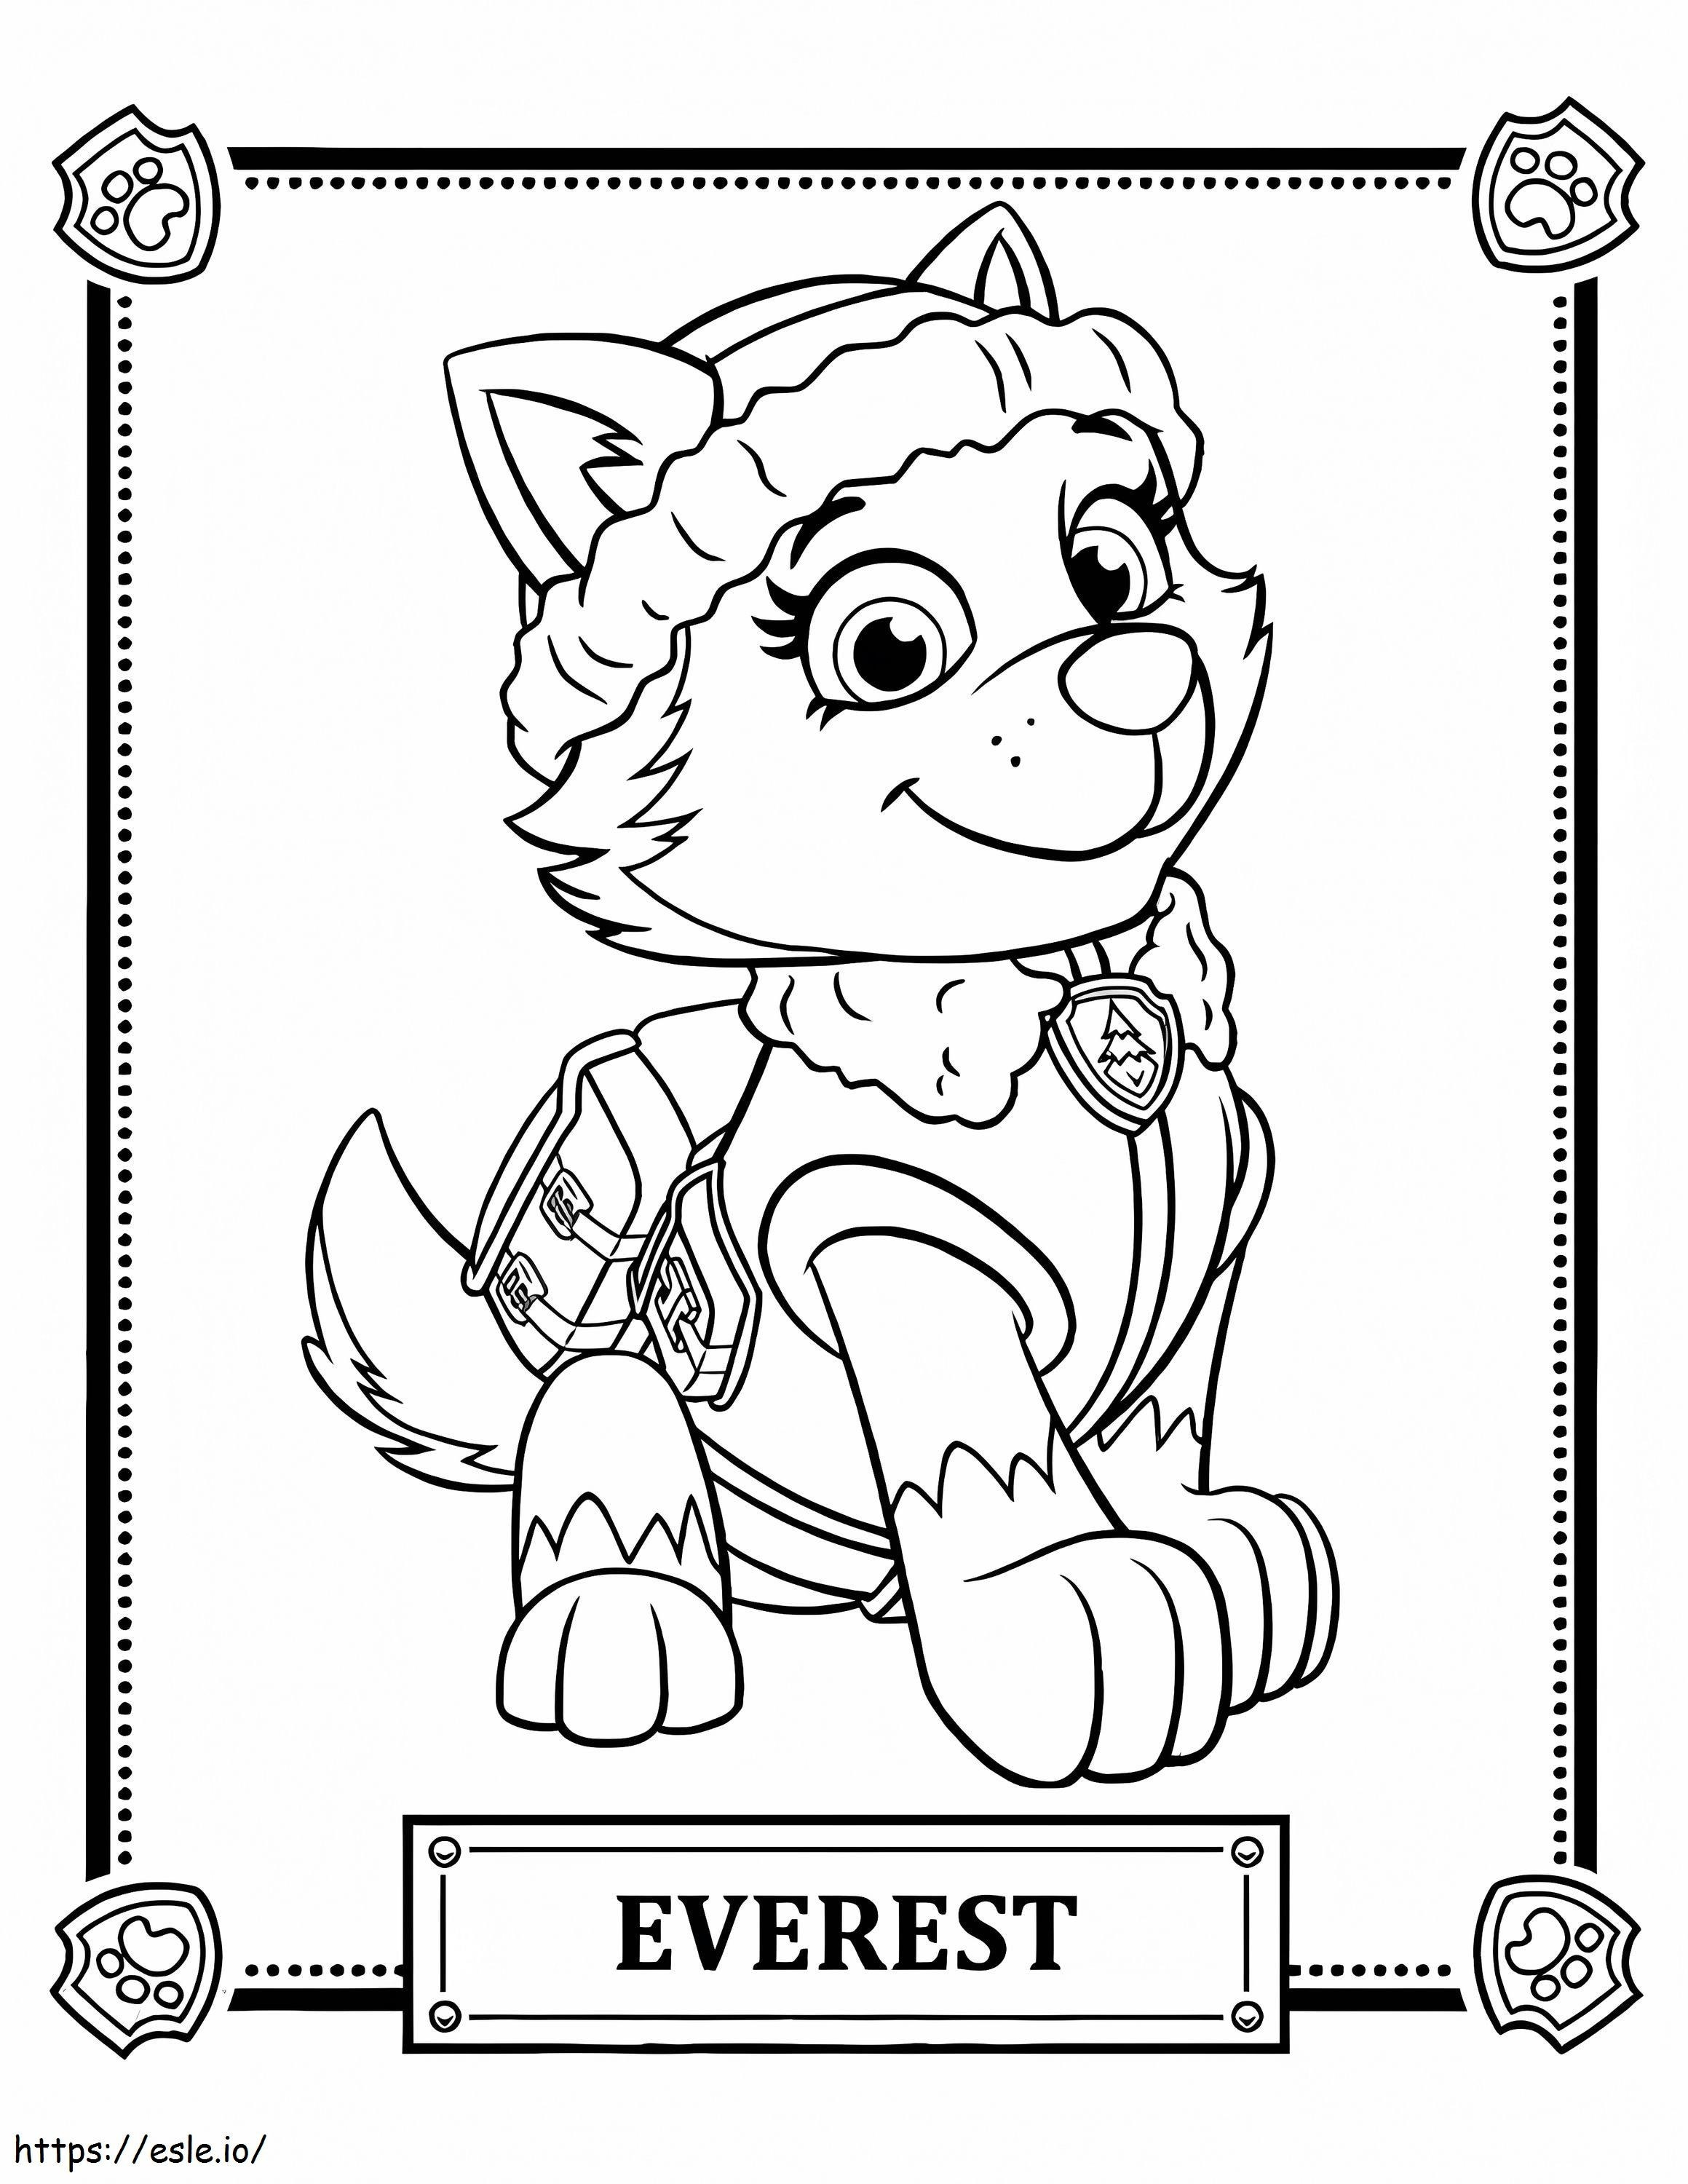 Everest Paw Patrol coloring page